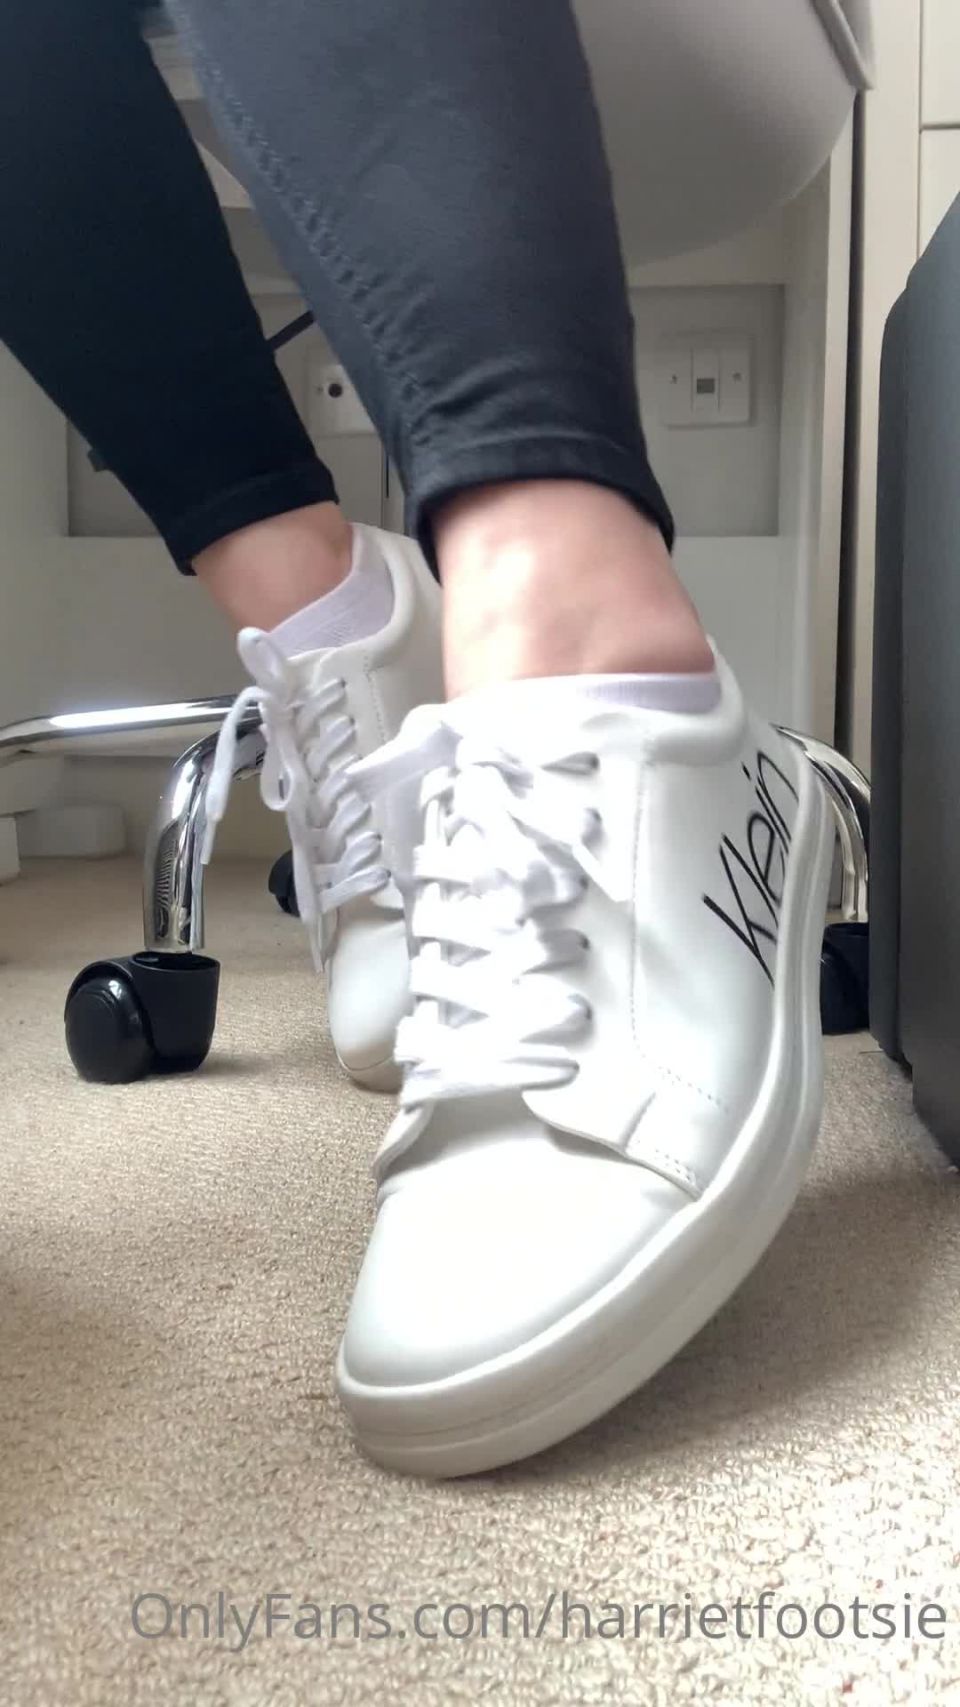 porn clip 39 harrietfootsie 170520212111684160 just casually working from home when you decide to come in and sit underneath my desk with - foot - feet porn foot fetish positions